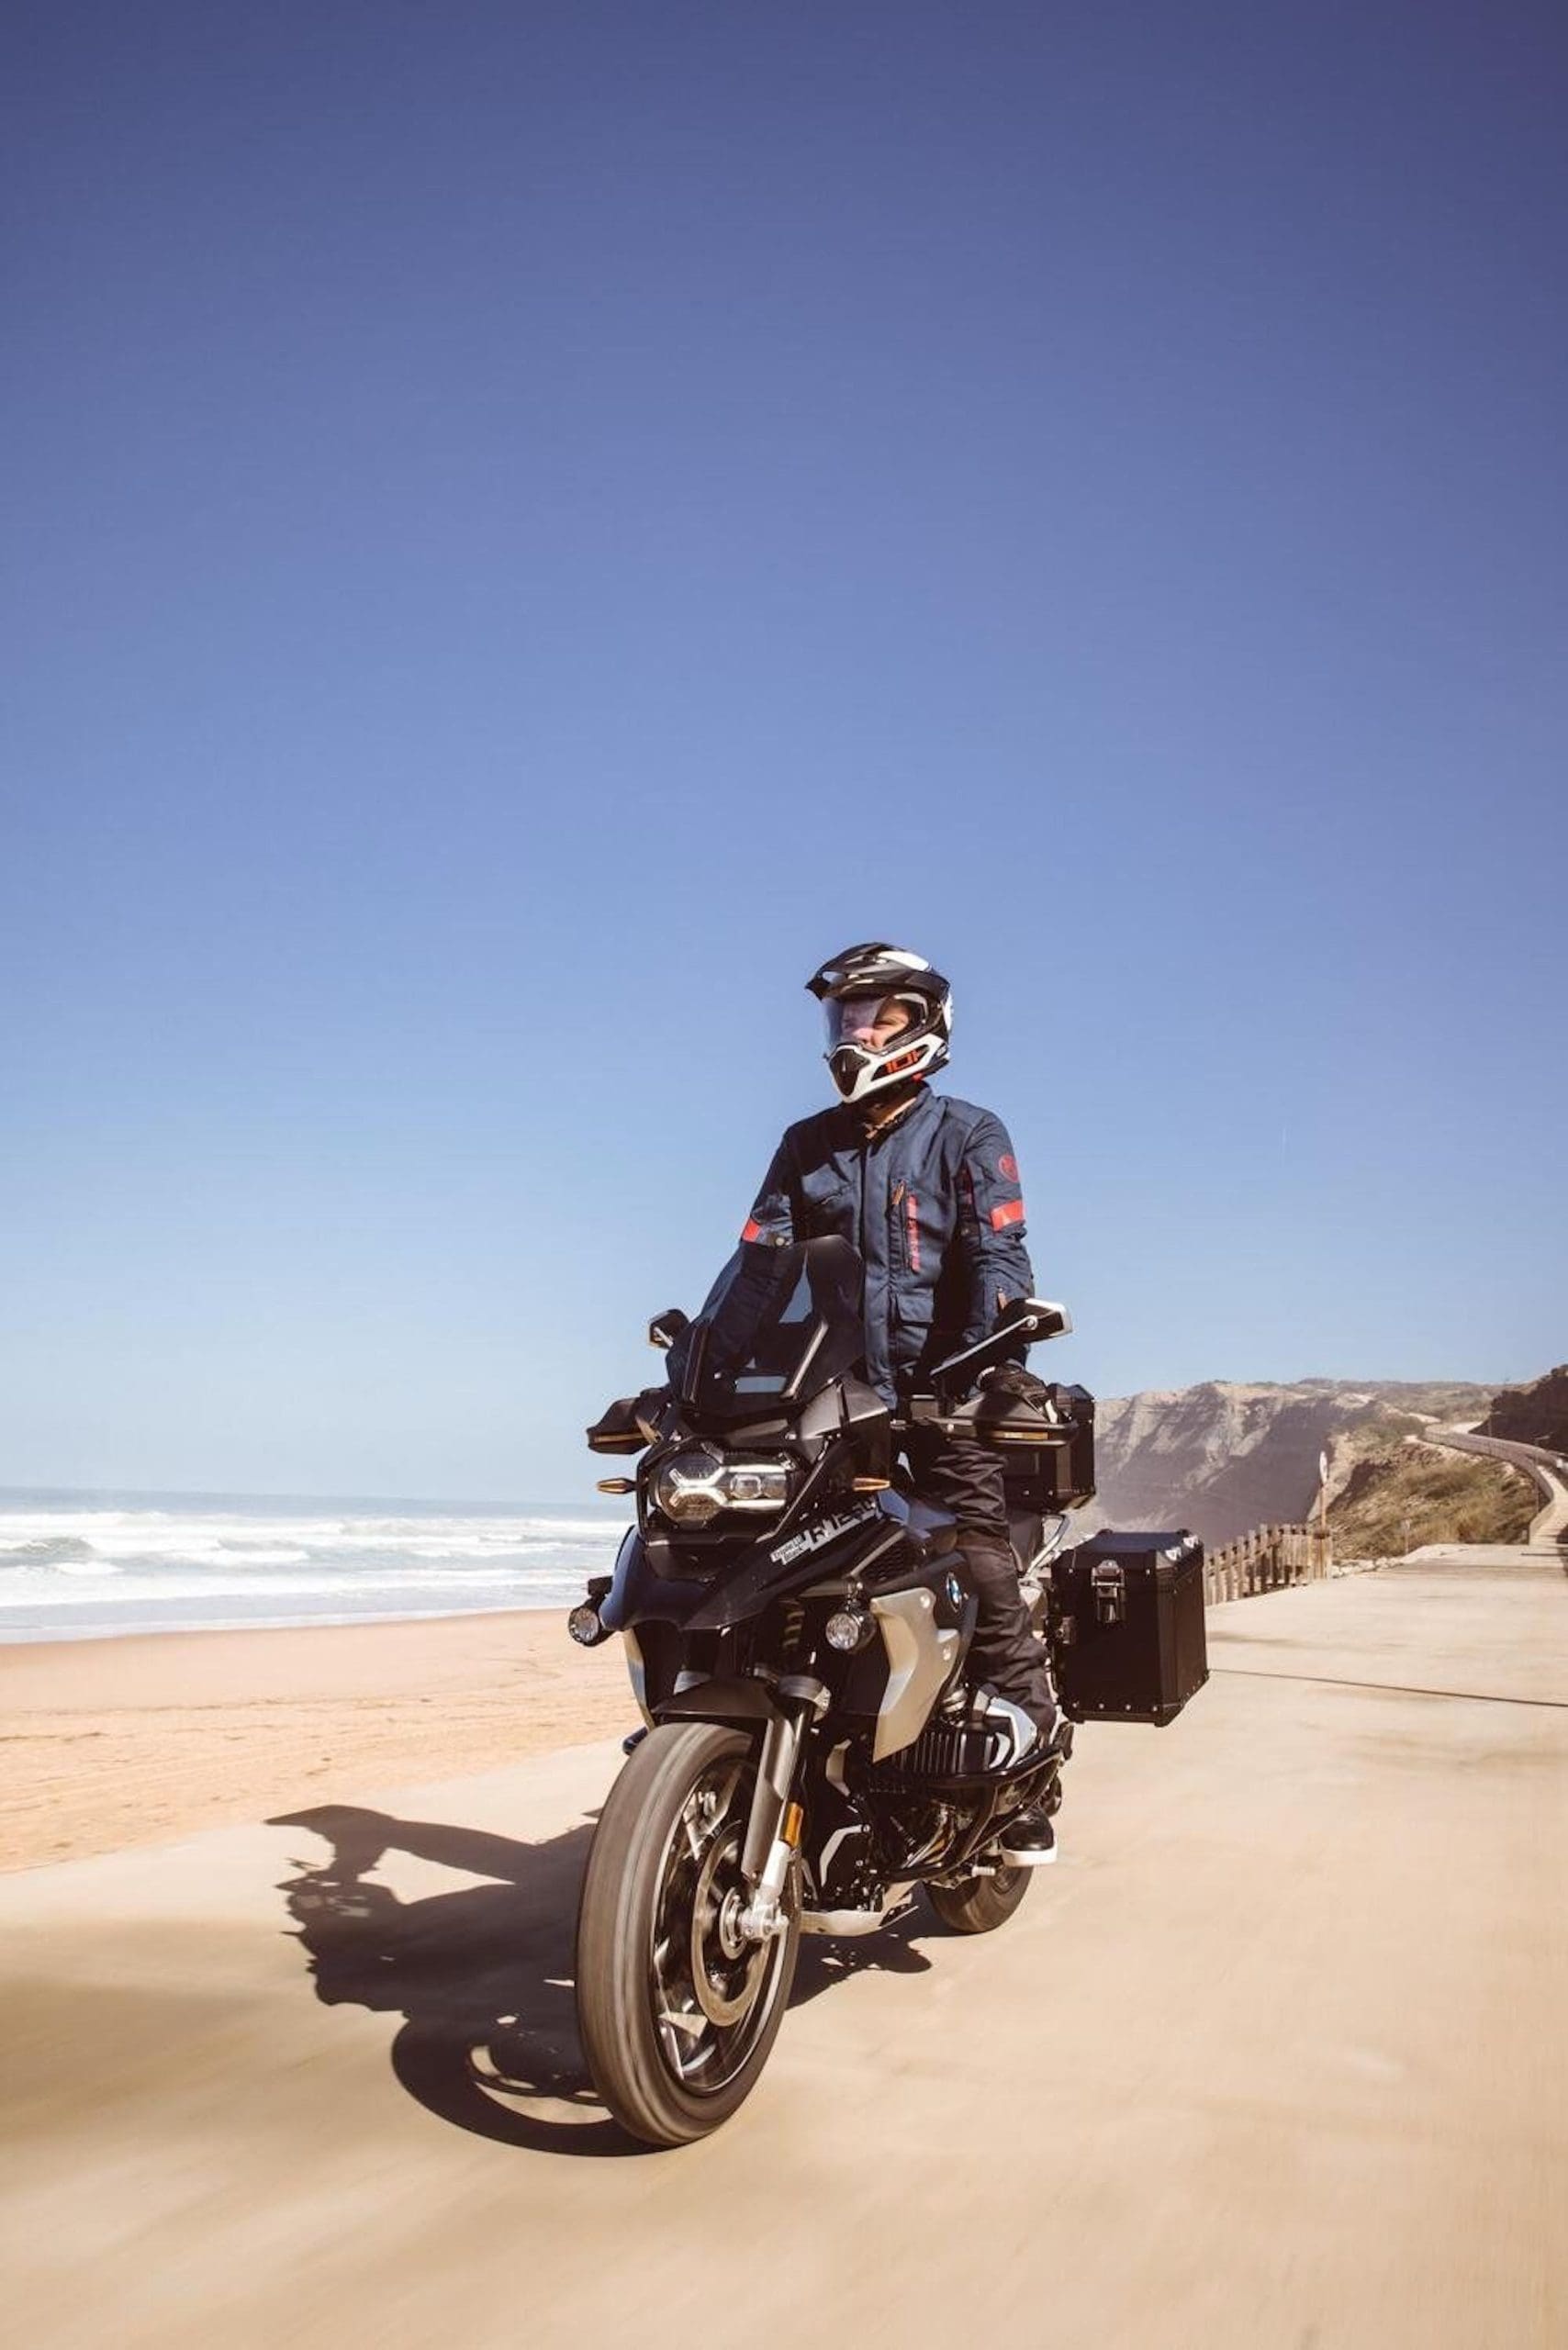 BMW's BMW R 1250 GS Ultimate Edition. Media sourced from MotoriOnline RED Live.